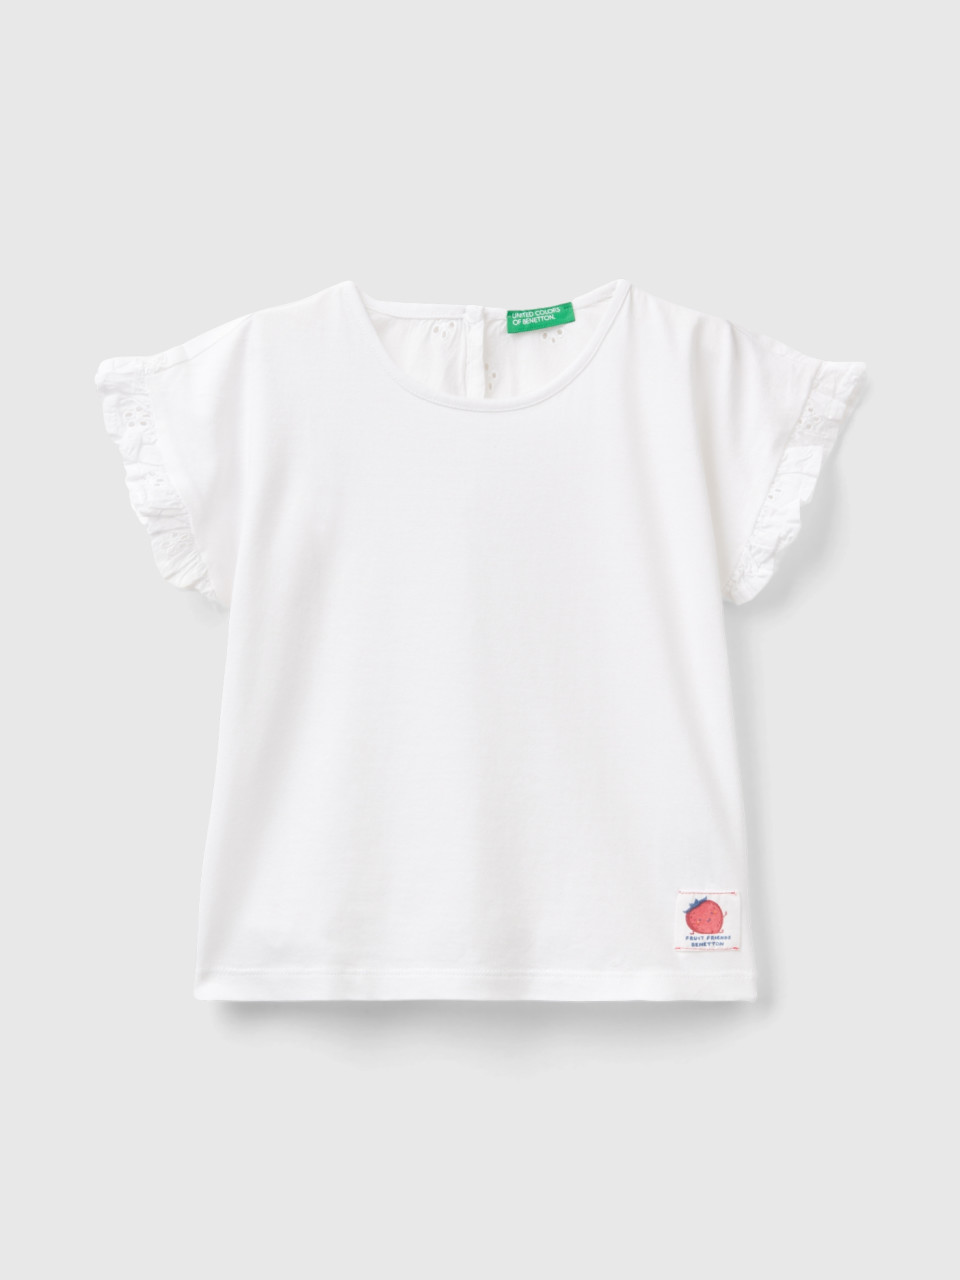 Benetton, T-shirt With Rouches And Broderie Anglaise Embroidery, White, Kids